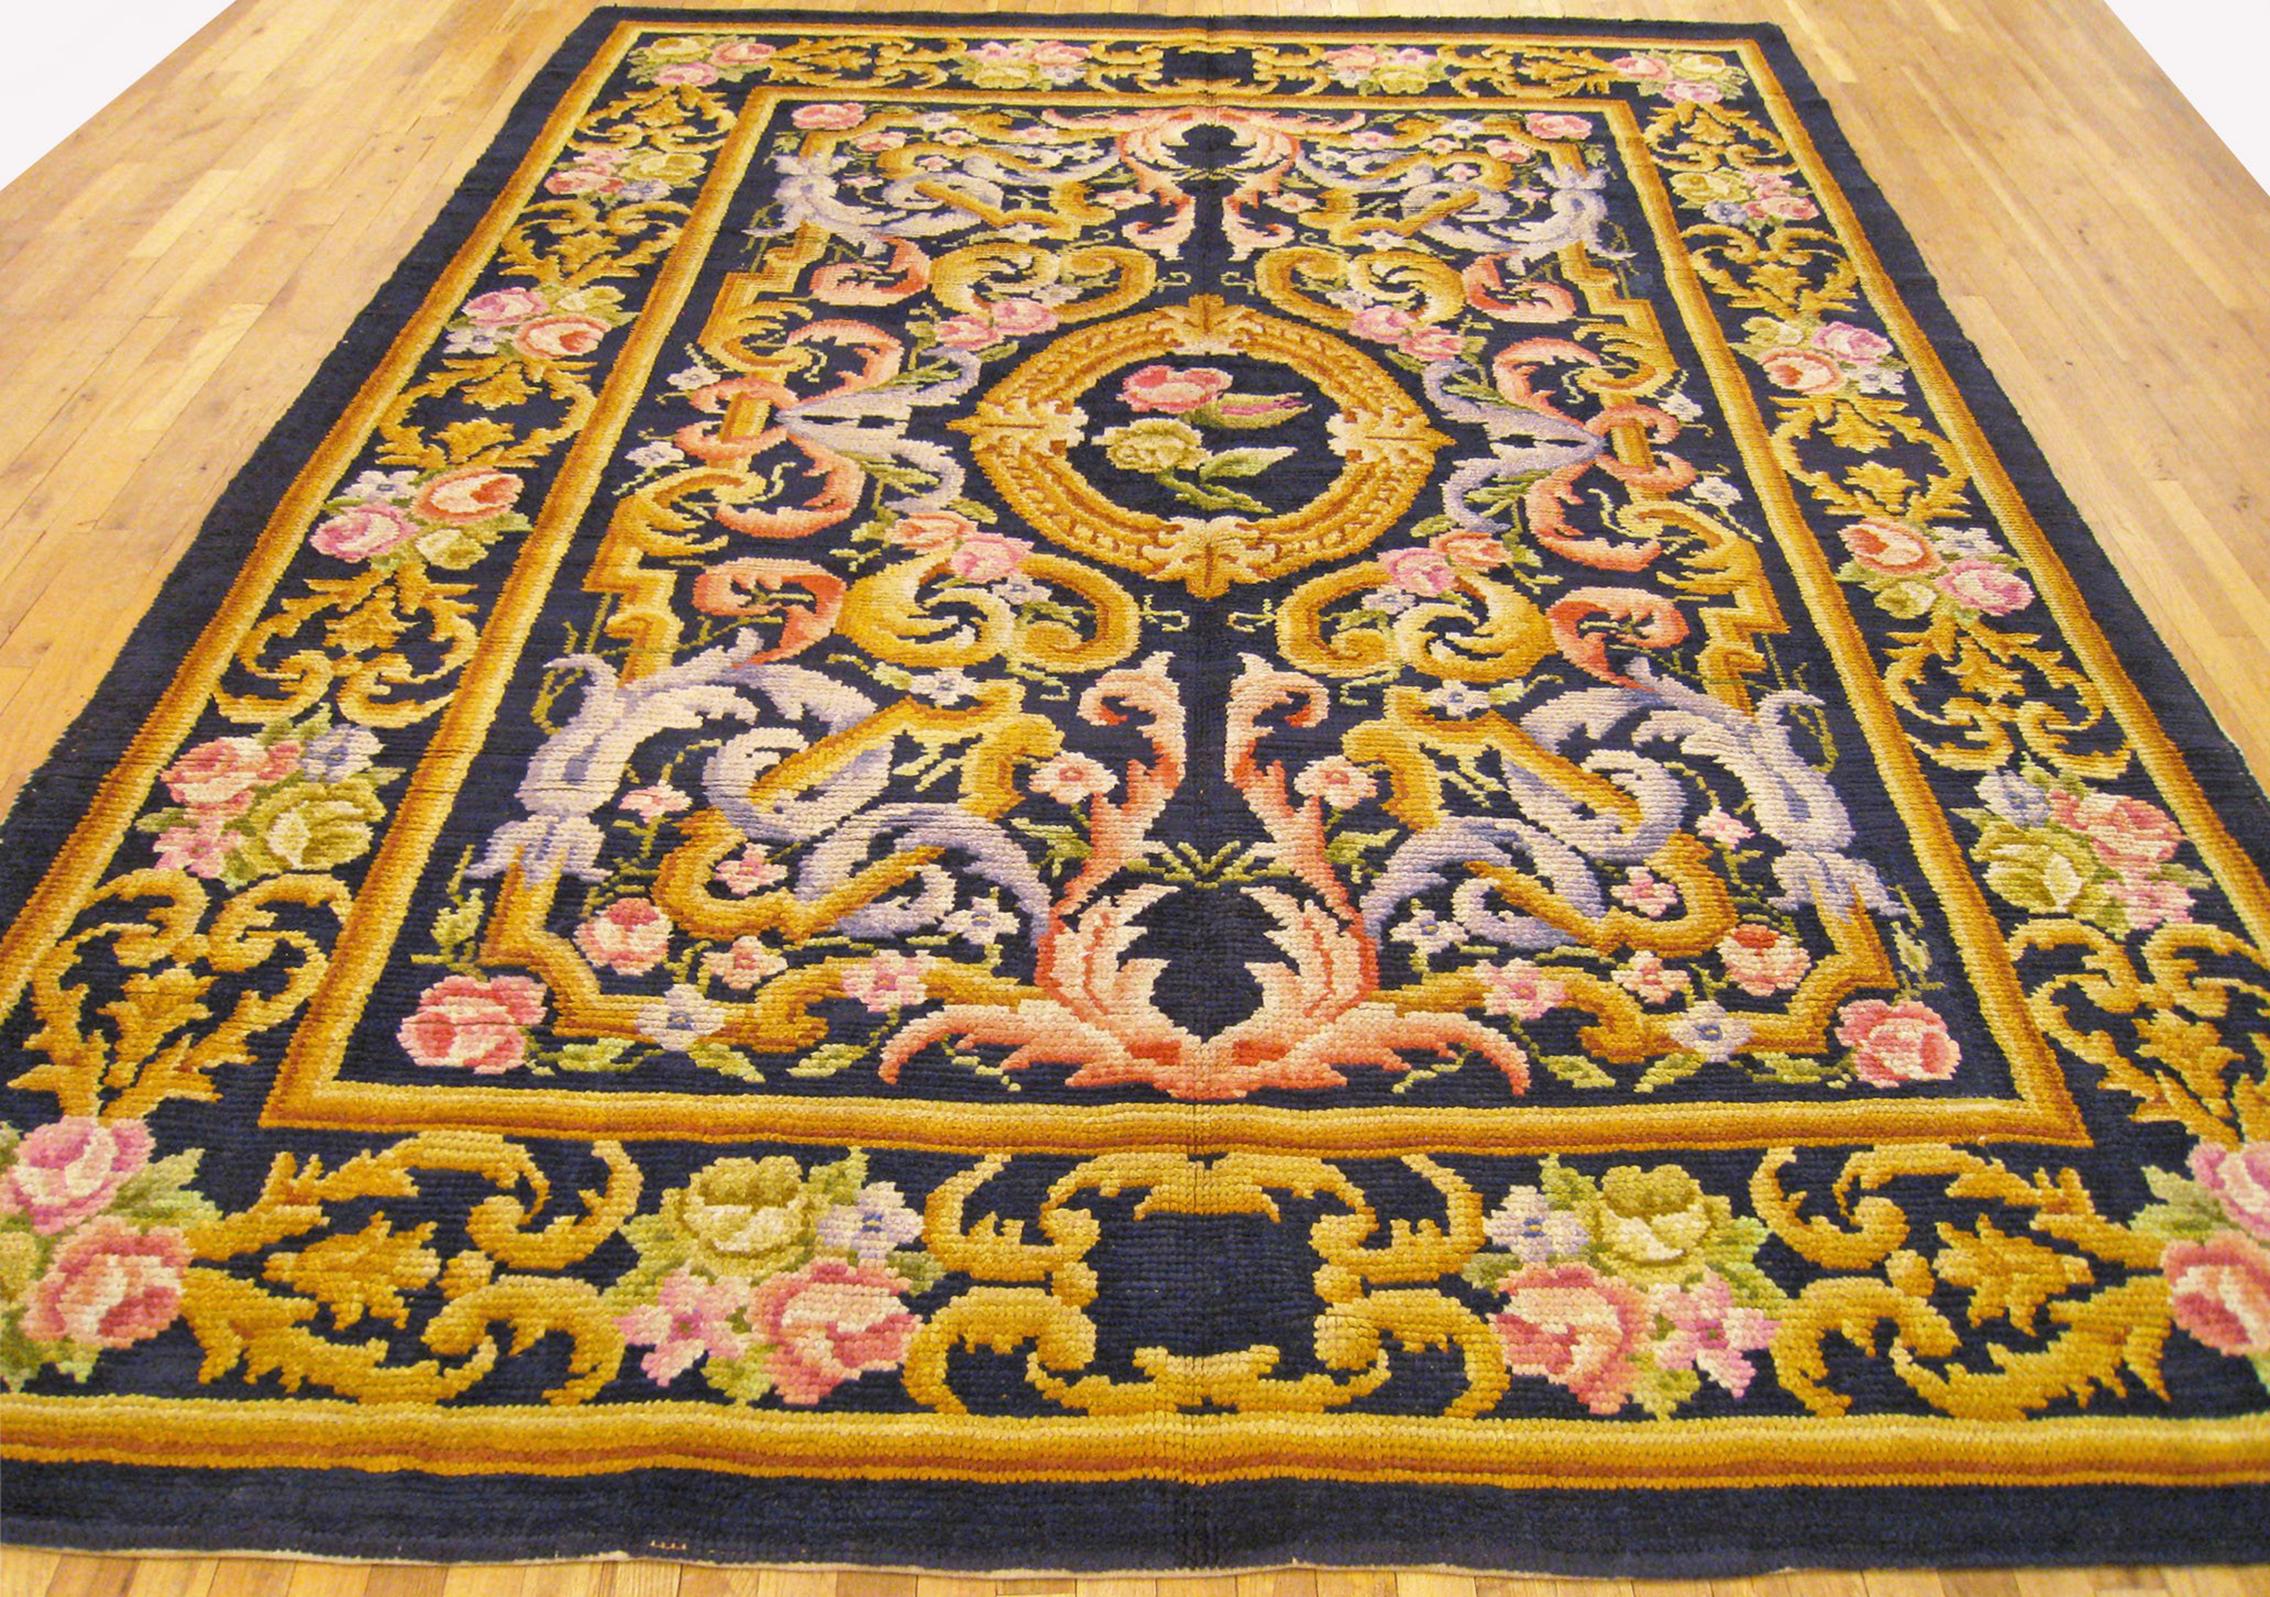 Vintage Spanish Savonnerie rug, Room size, circa 1930

A one-of-a-kind vintage Spanish Savonnerie oriental carpet, hand-knotted with soft wool pile. This lovely hand-knotted wool rug features a central medallion on the dark blue field, with a dark